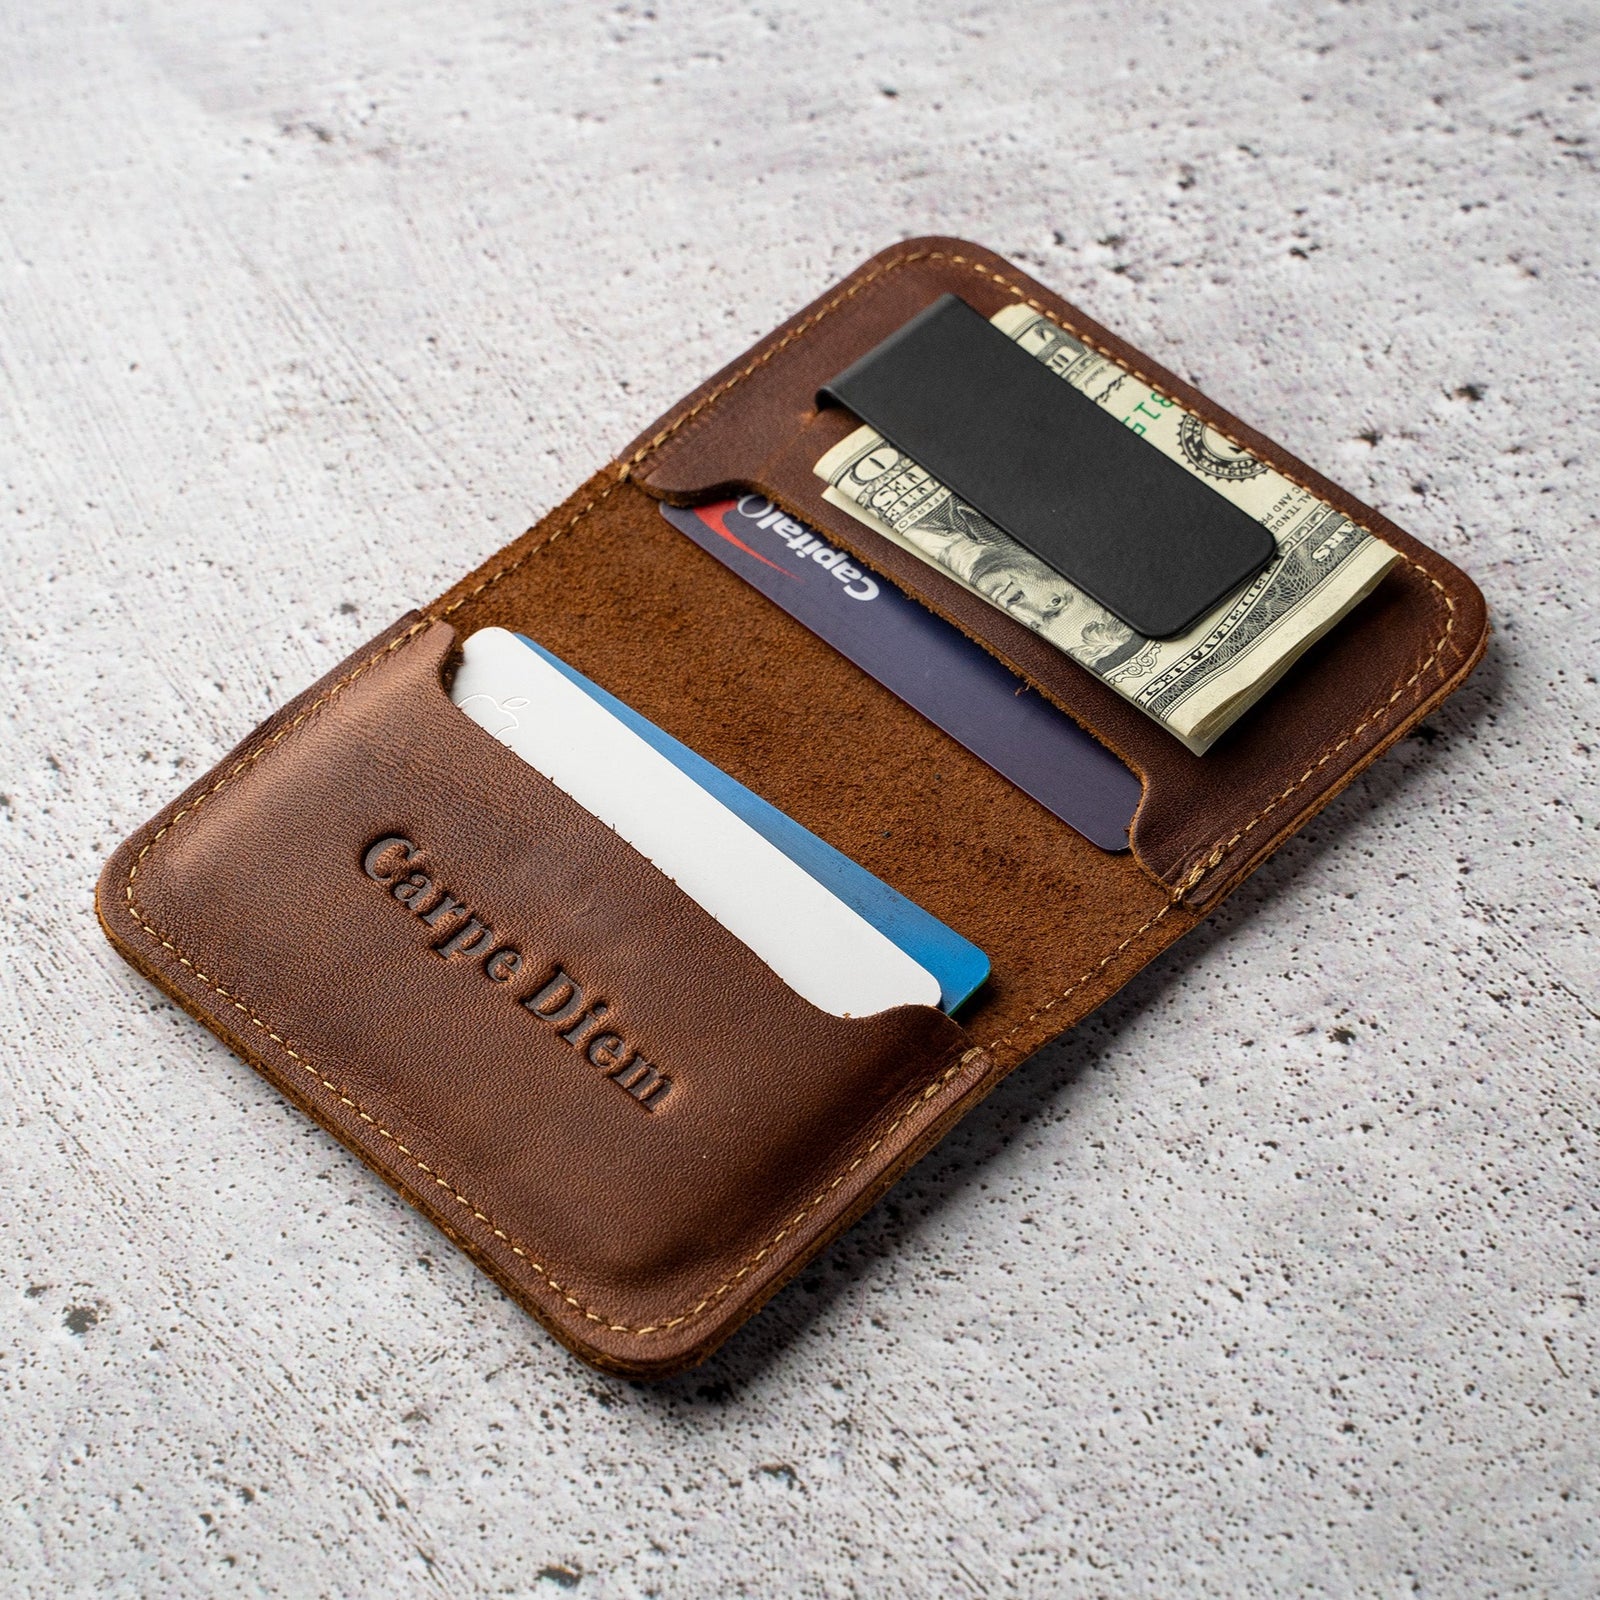 Genuine Leather Men Wallet Small Men Walet Zipper&Hasp Male Portomonee  Short Coin Purse Brand Perse Carteira For Rfid From Flin68, $20.31 |  DHgate.Com